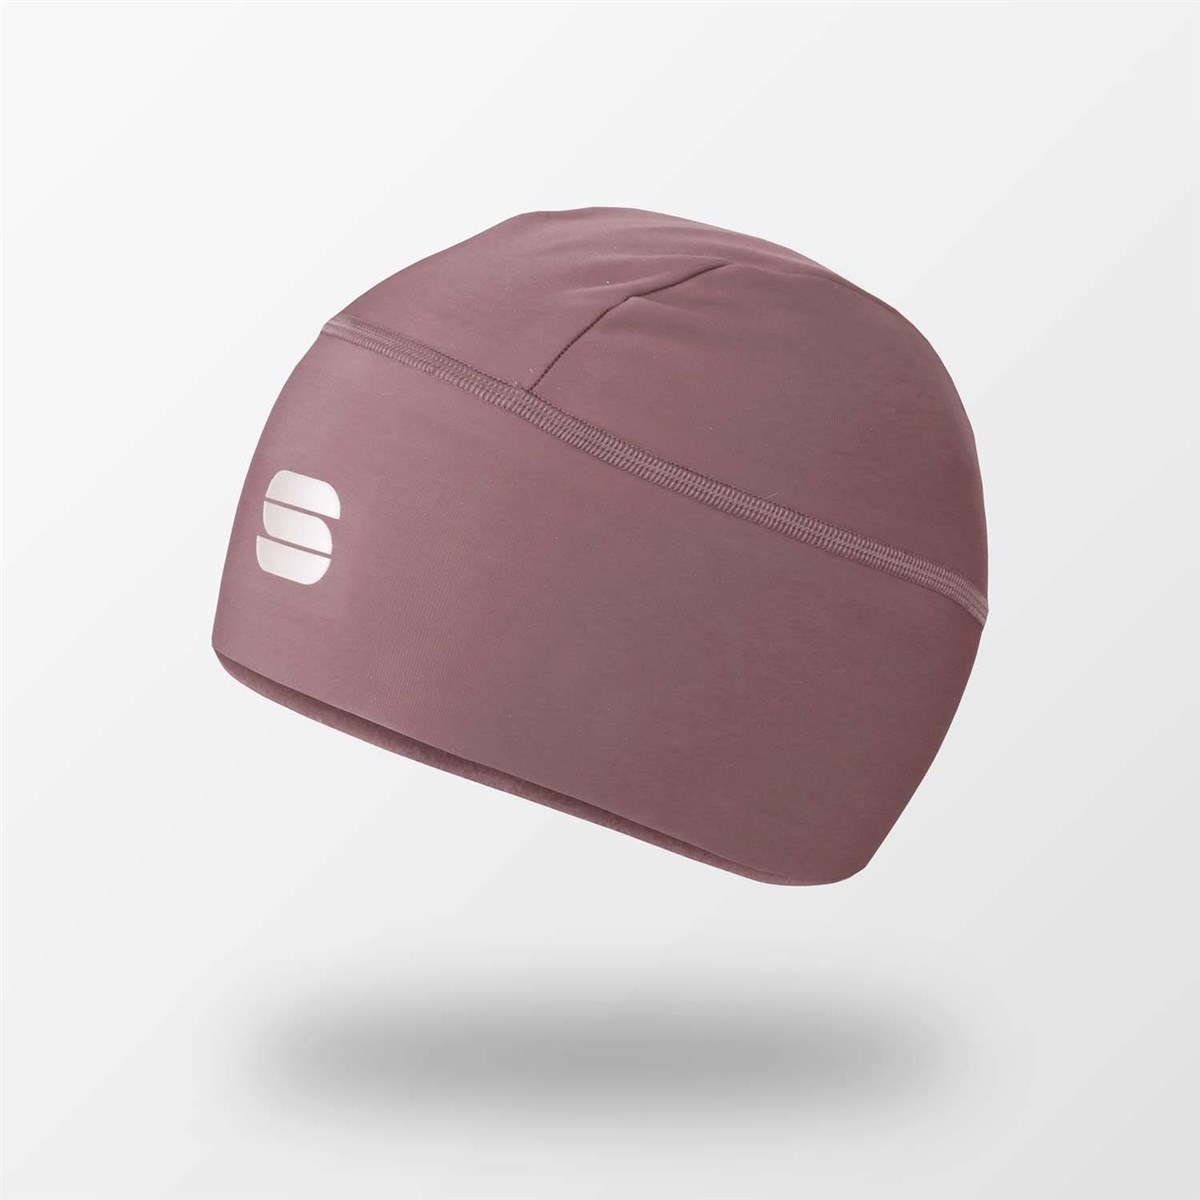 Sportful Matchy Womens Cycling Cap product image